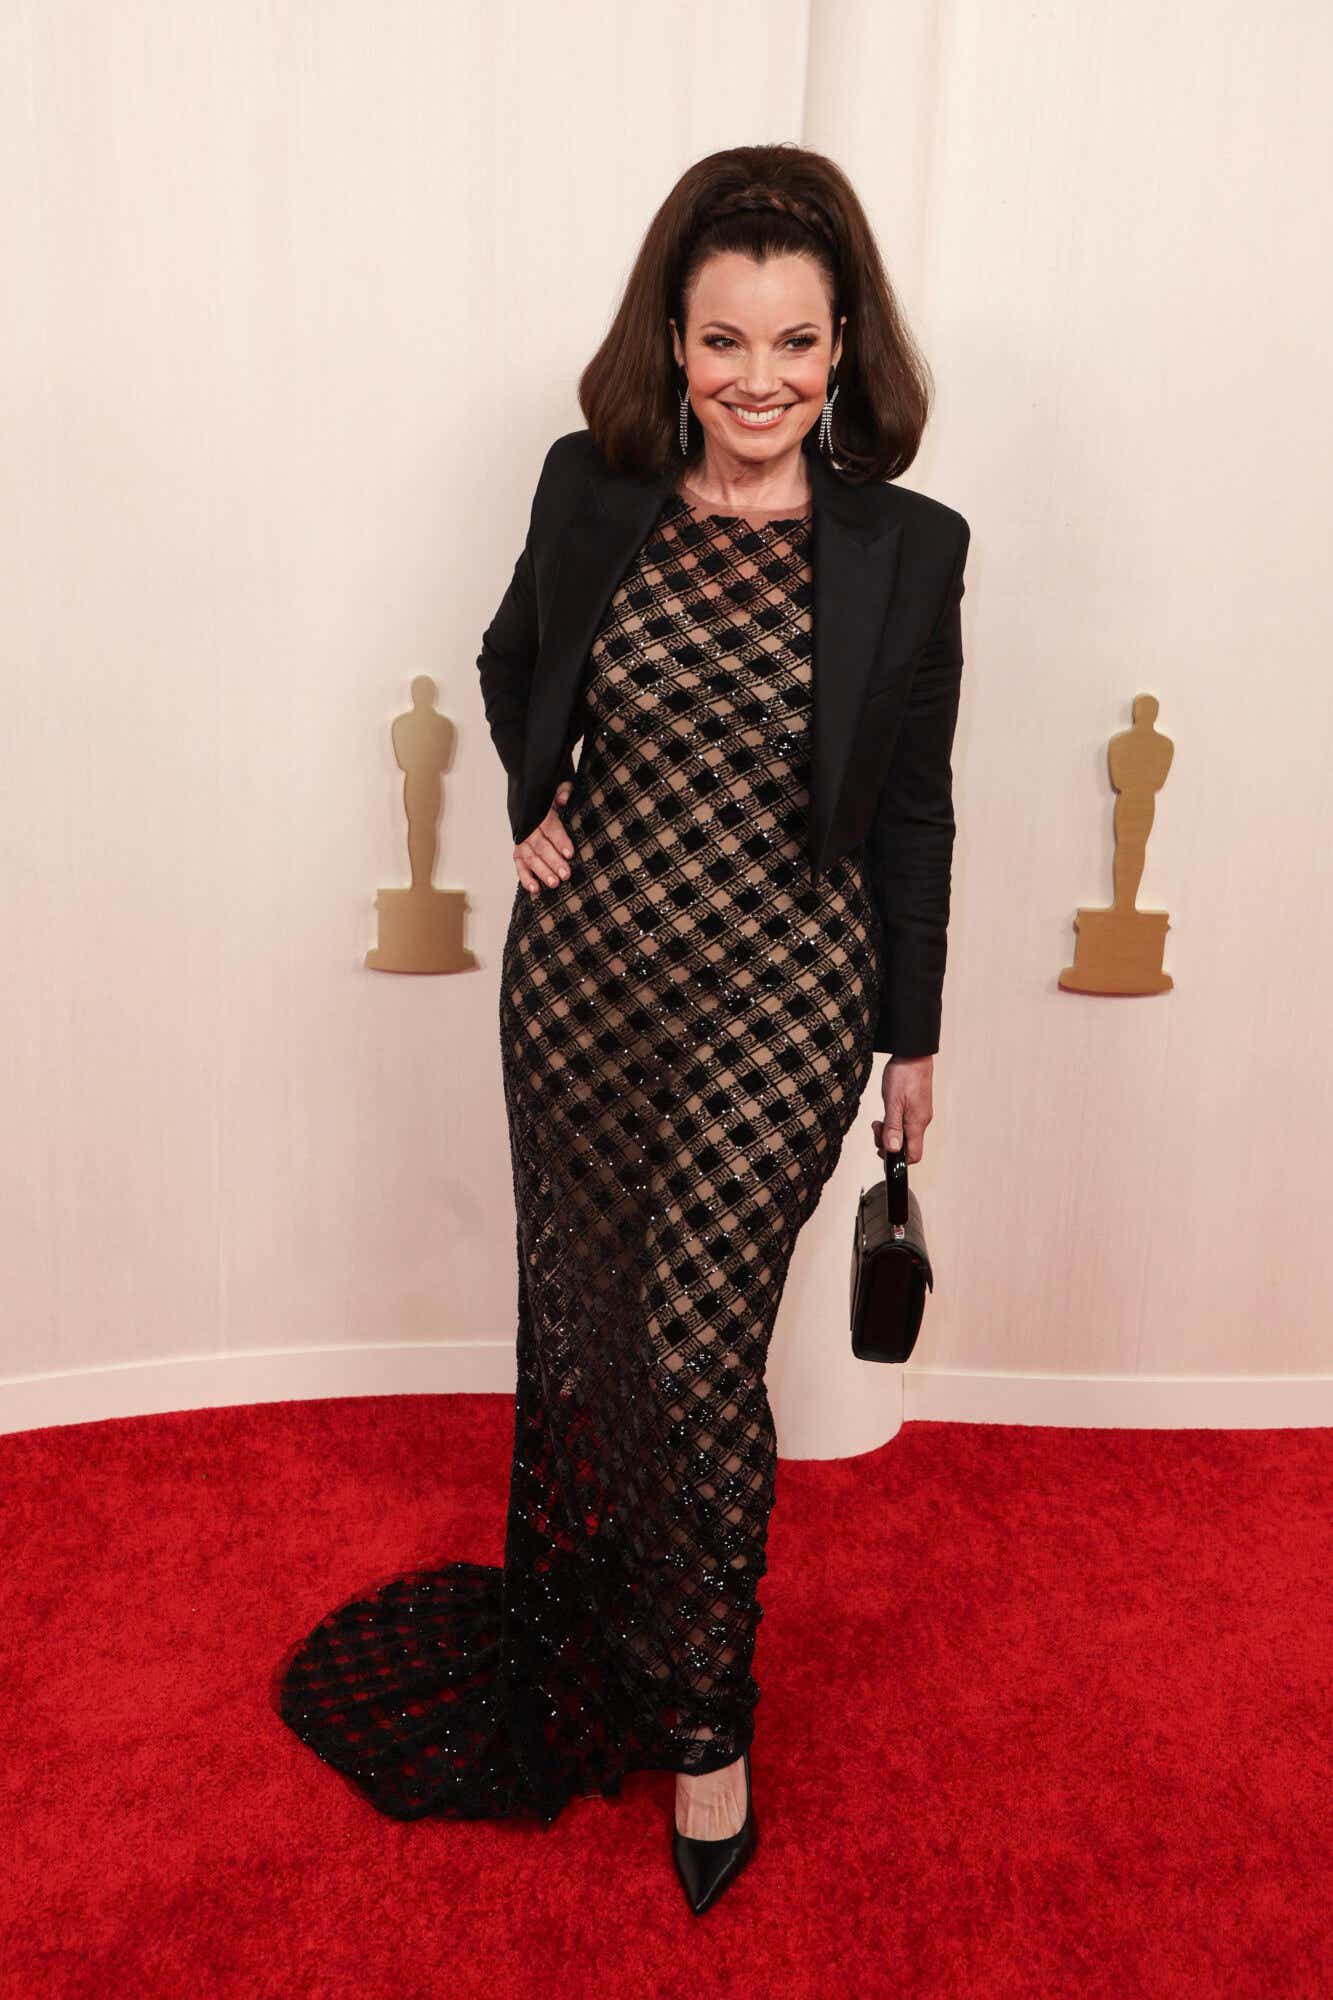 Fran Drescher arrives at the Oscars wearing a sheer gown with black sequined checker overlay and a cropped black blazer.